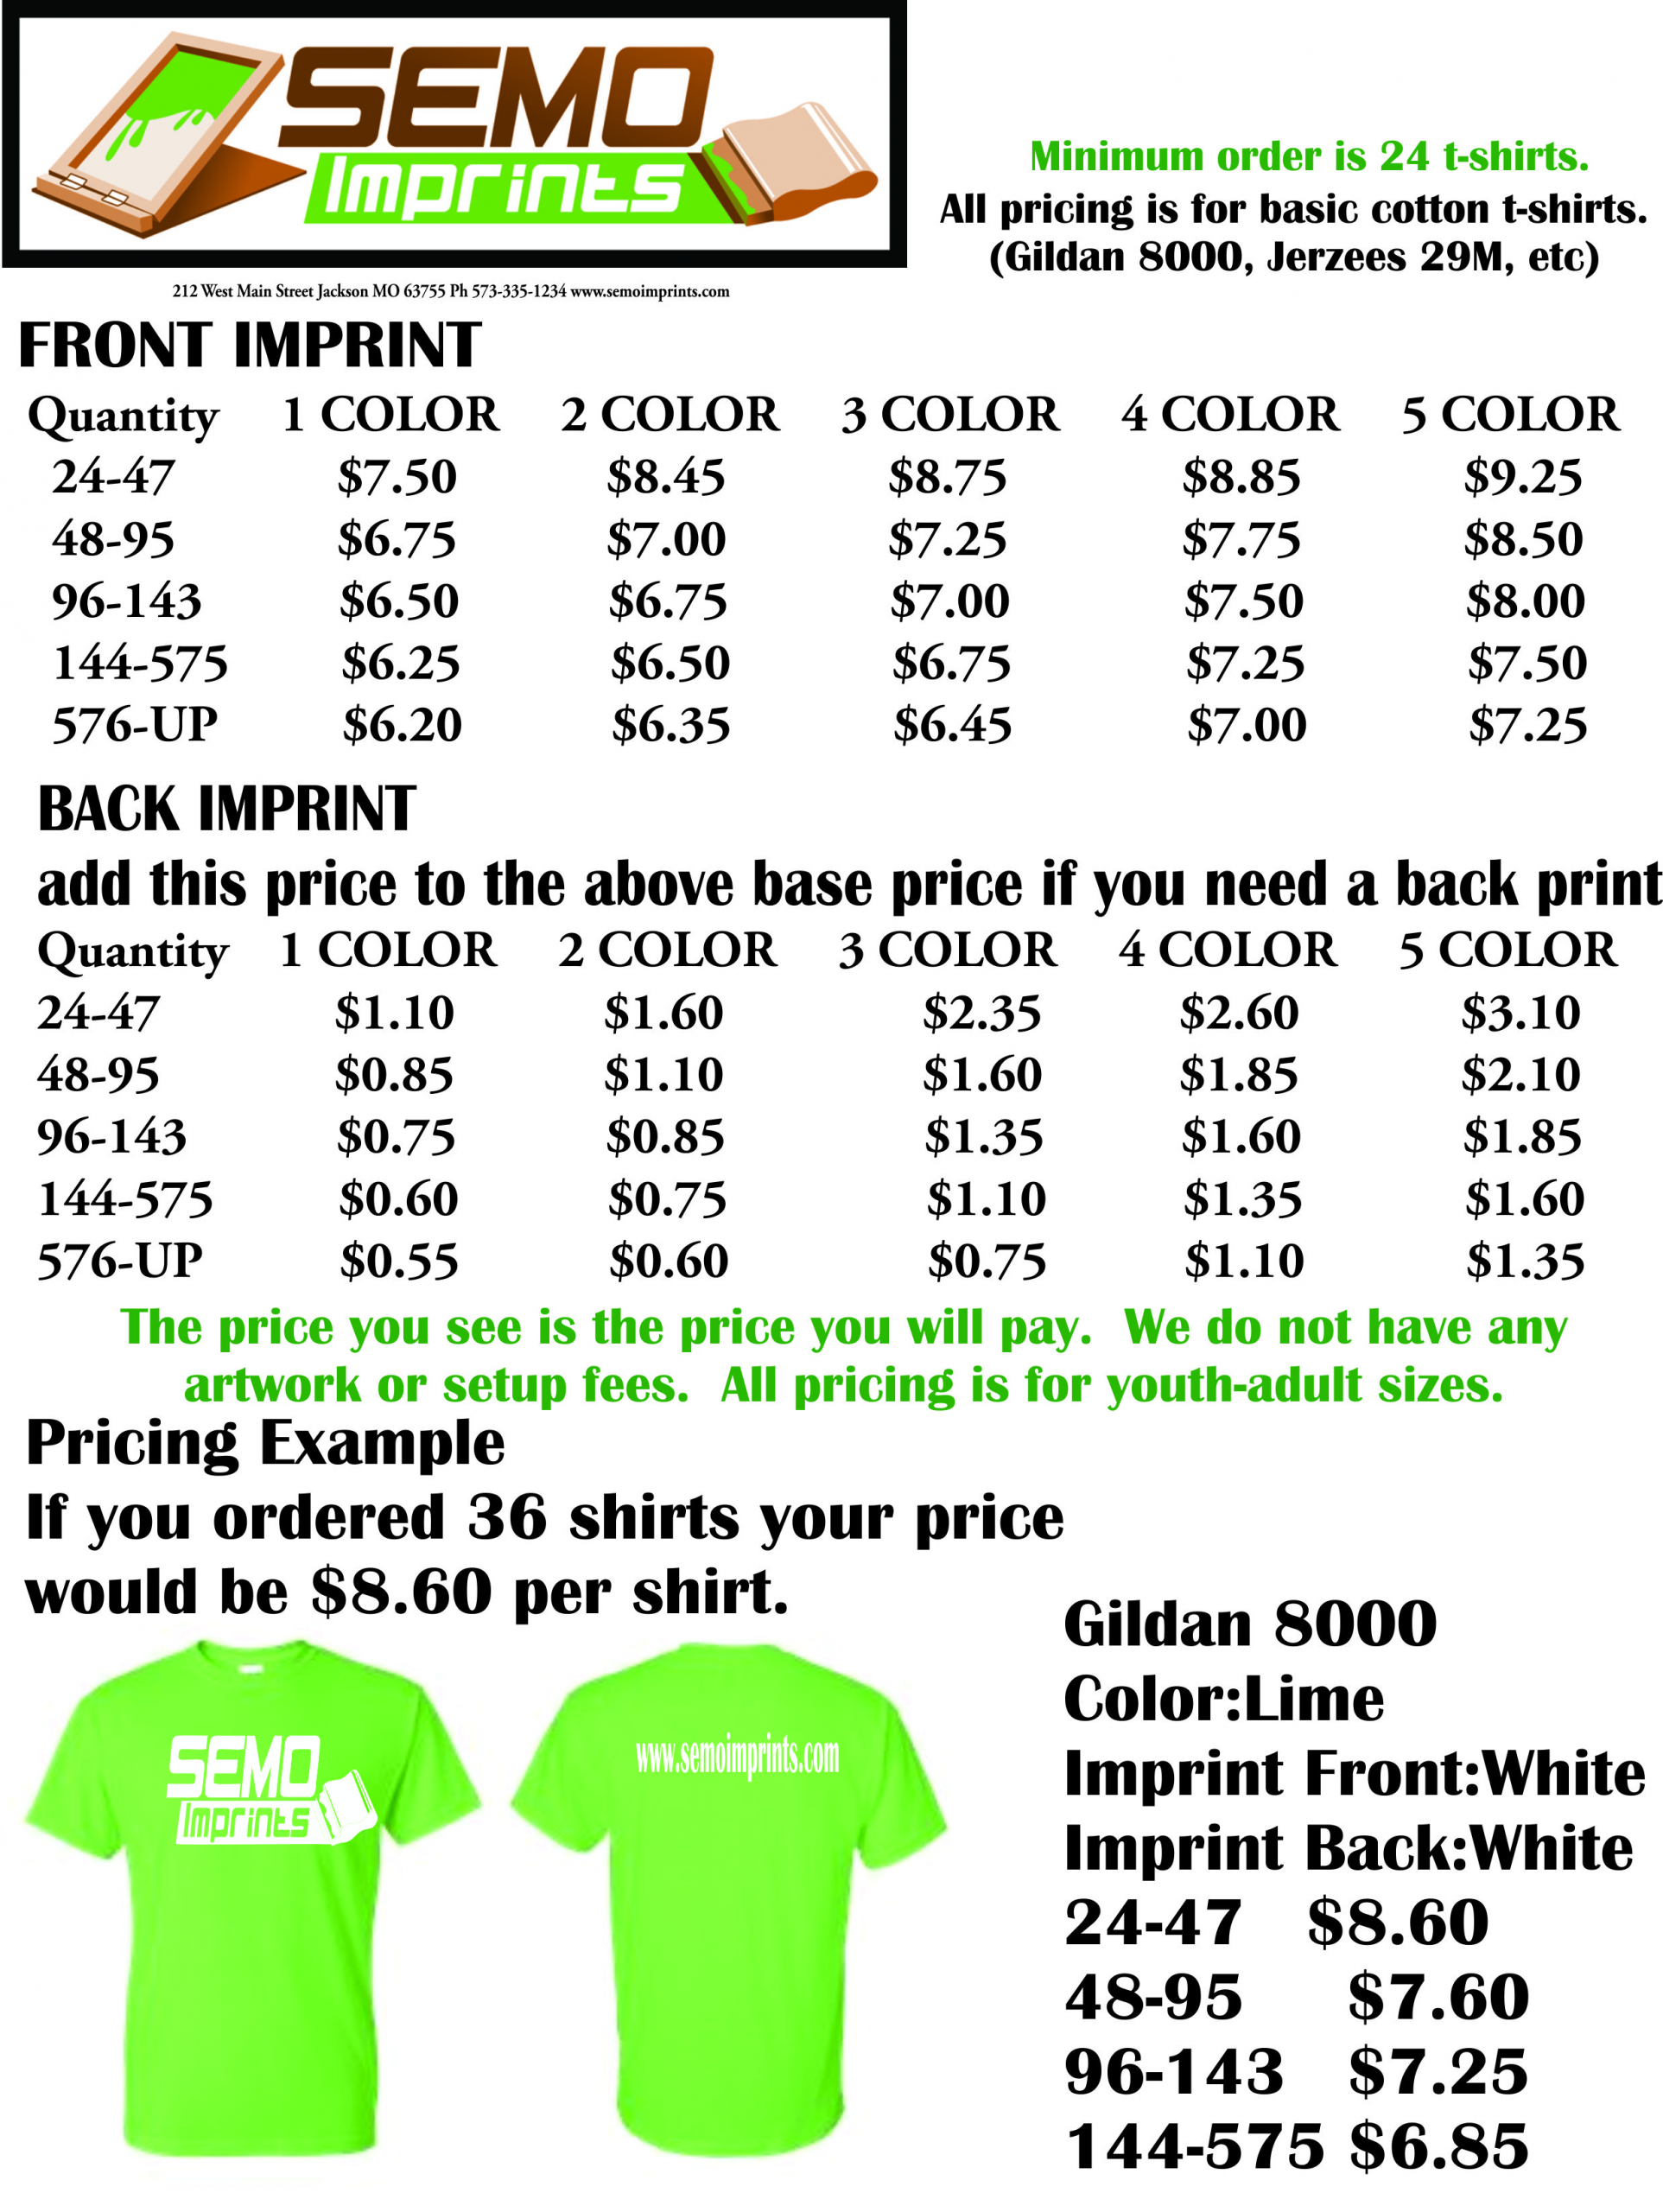 T-Shirt Cafe Pricing Guide  Tshirt business, Screen printing business,  Vinyl shirts pricing chart